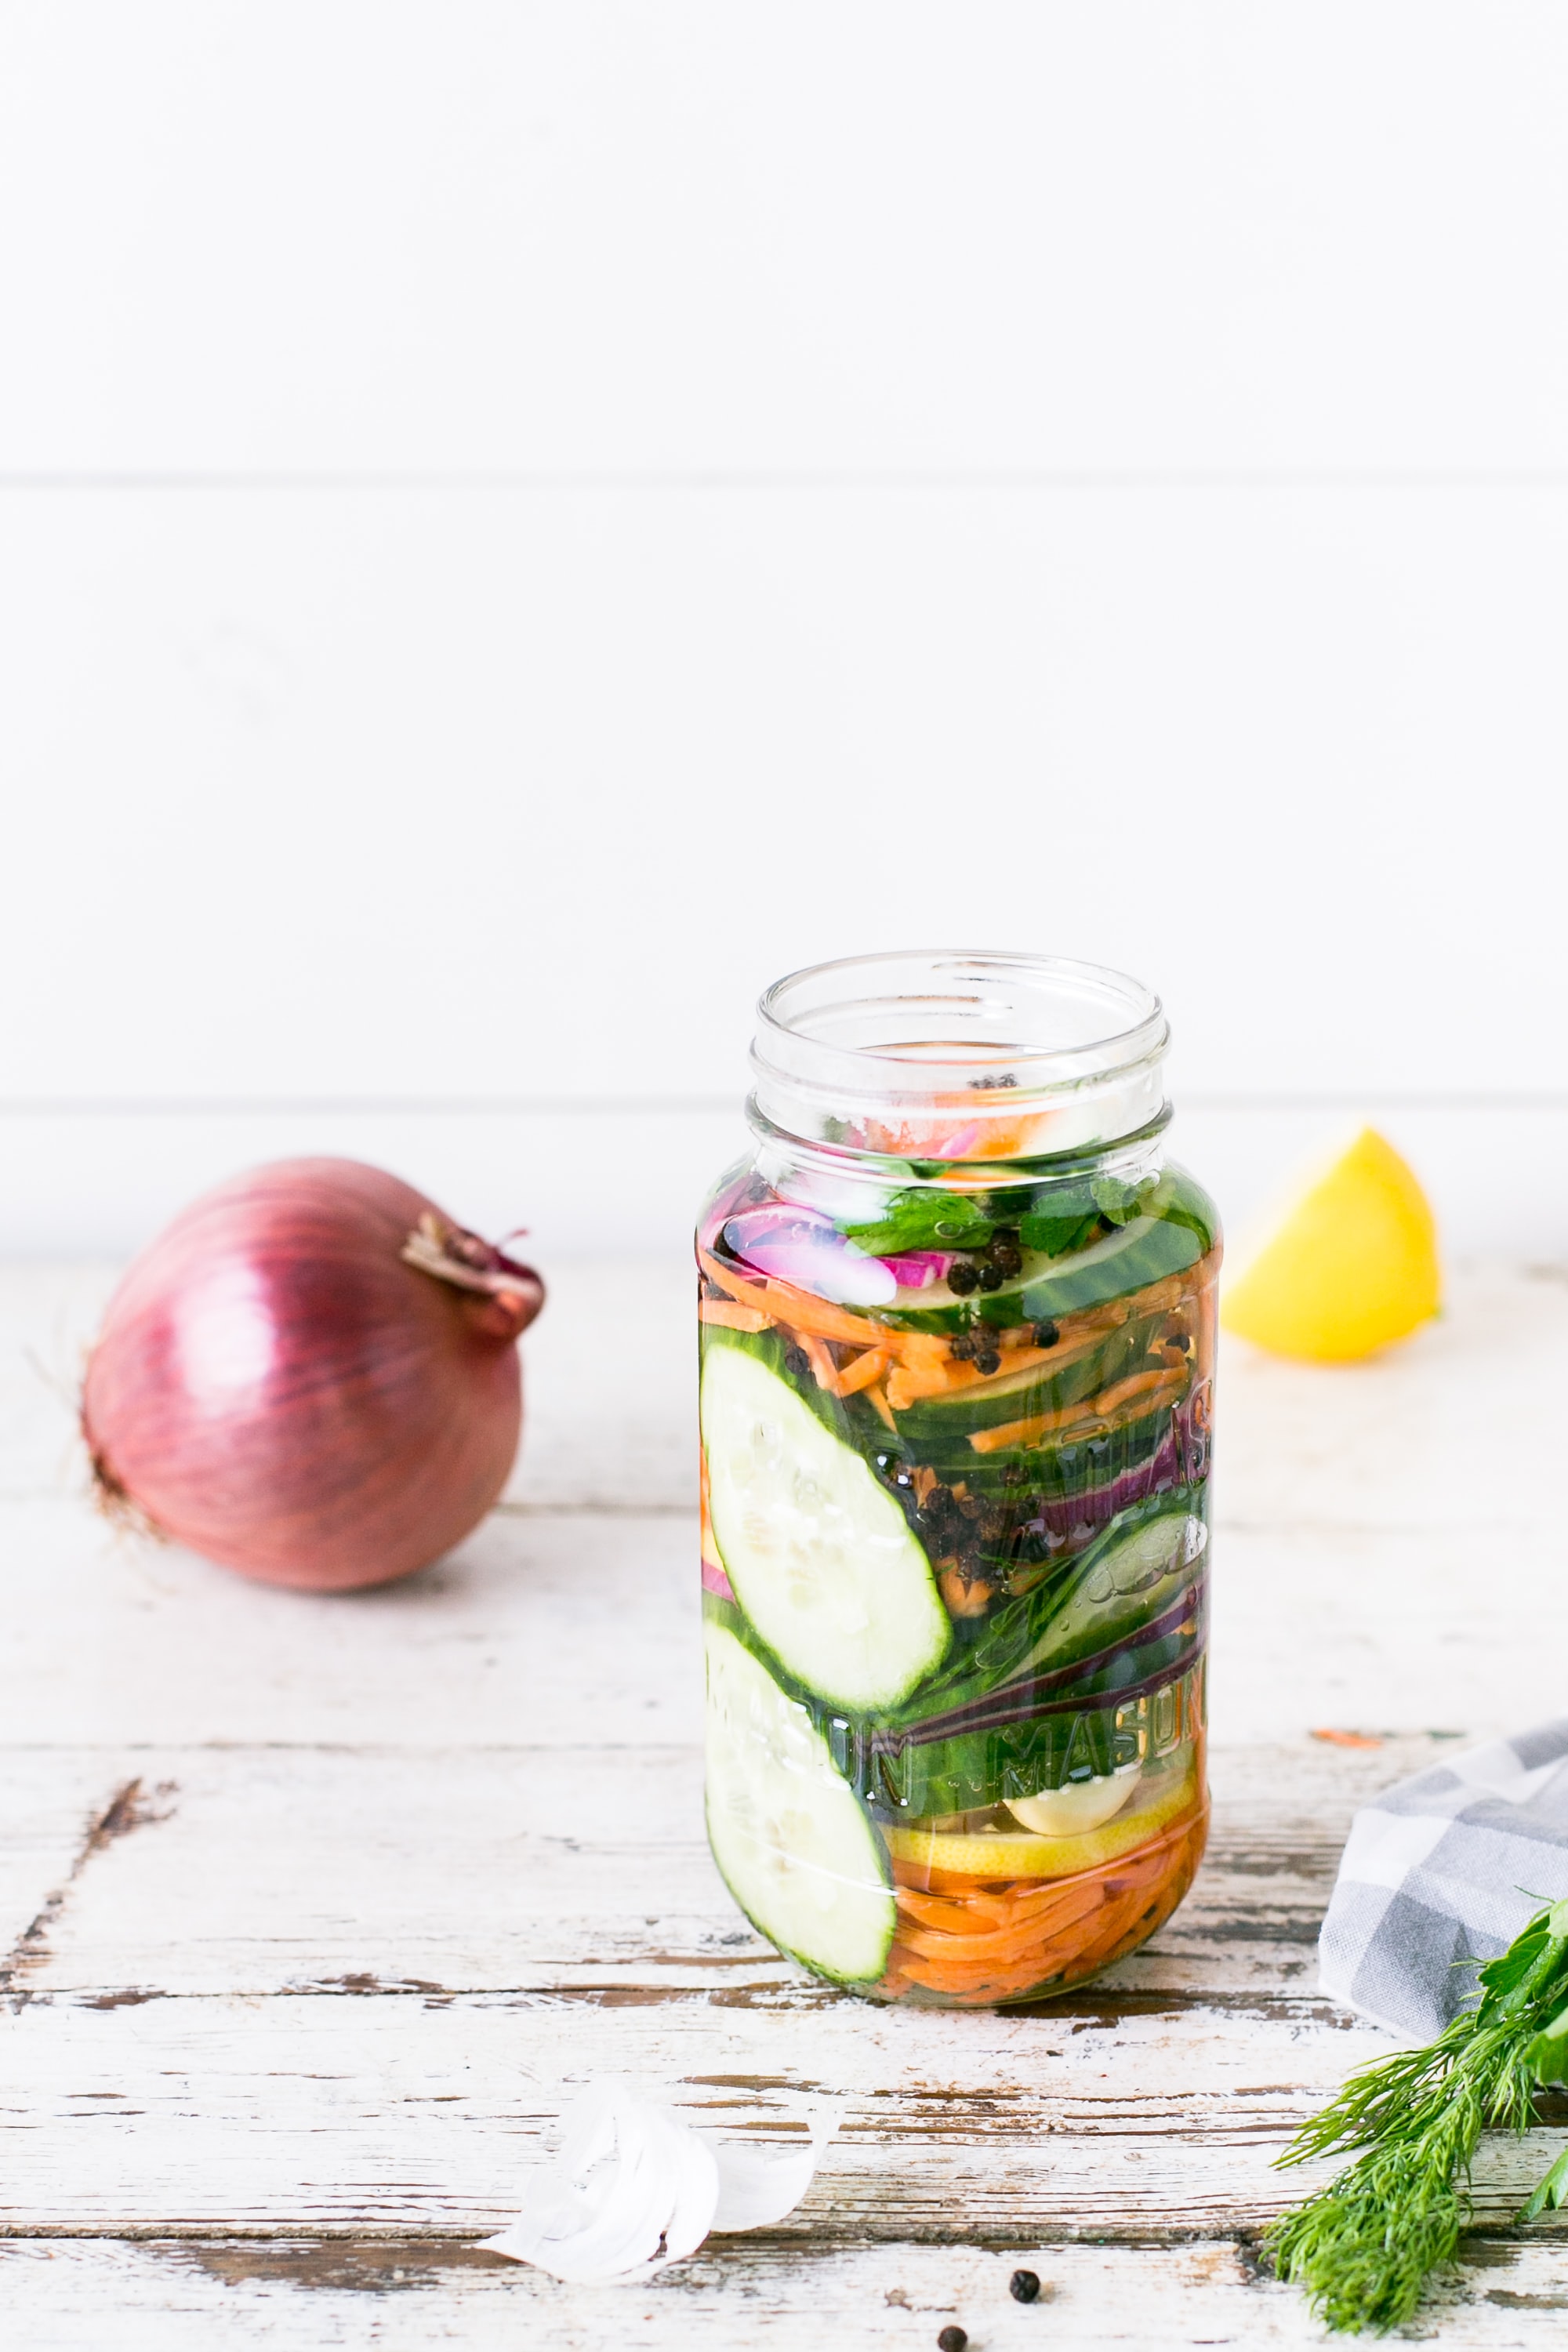 Glass jar with chopped vegetables inside